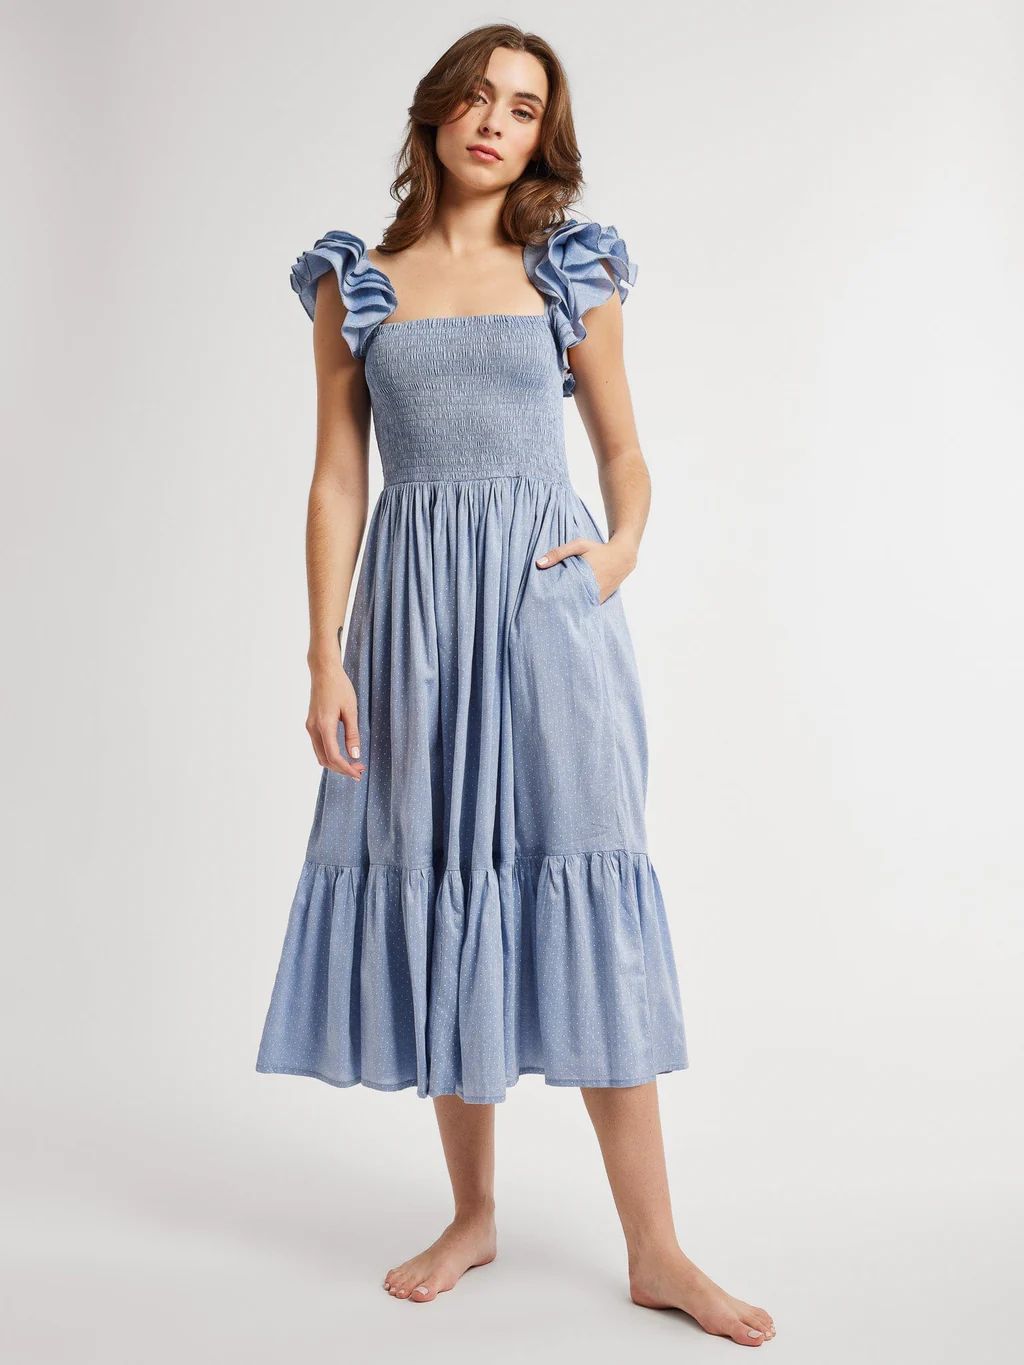 Olympia Dress in Chambray Polka Dot | Mille